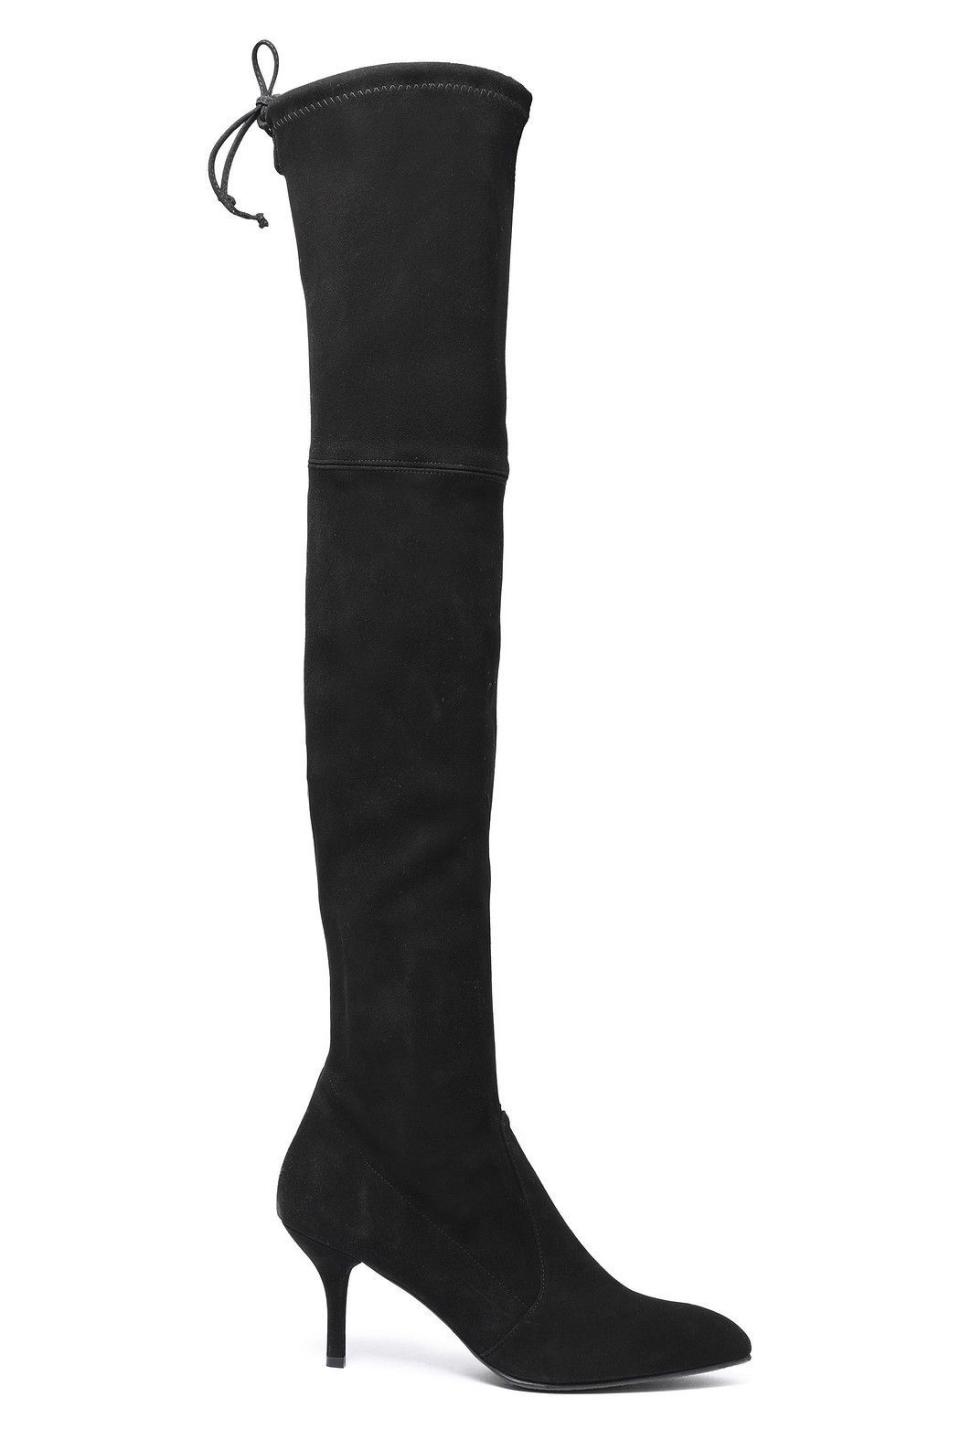 12) Over-the-Knee Boots